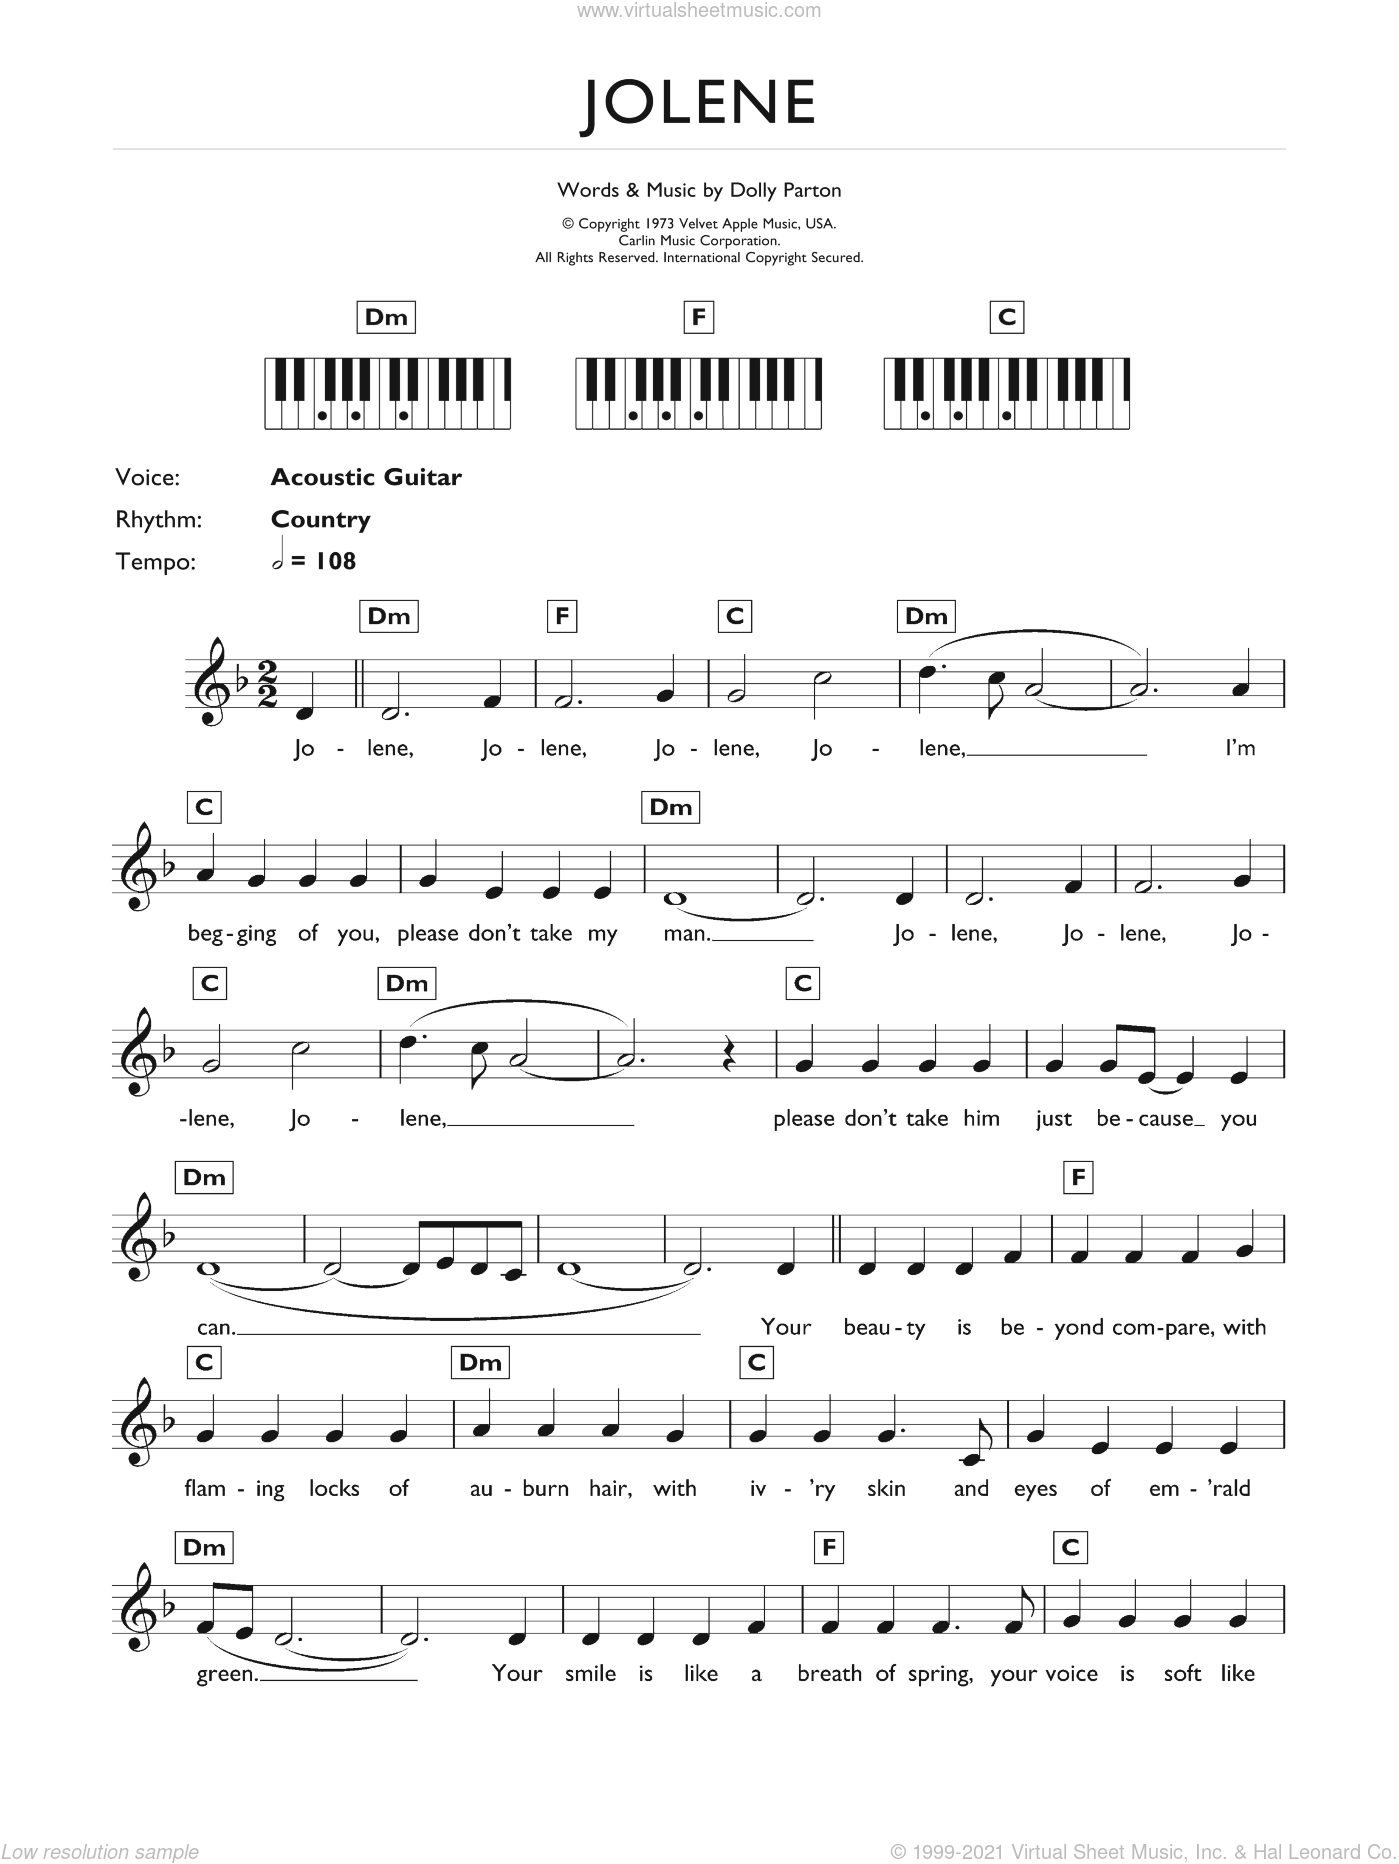 Parton Jolene Sheet Music For Piano Solo Keyboard V2 How to play dolly parton jolene guitar lesson with chords and tab tutorial tab book available here amzn.to/2qxgduw. parton jolene sheet music for piano solo keyboard v2